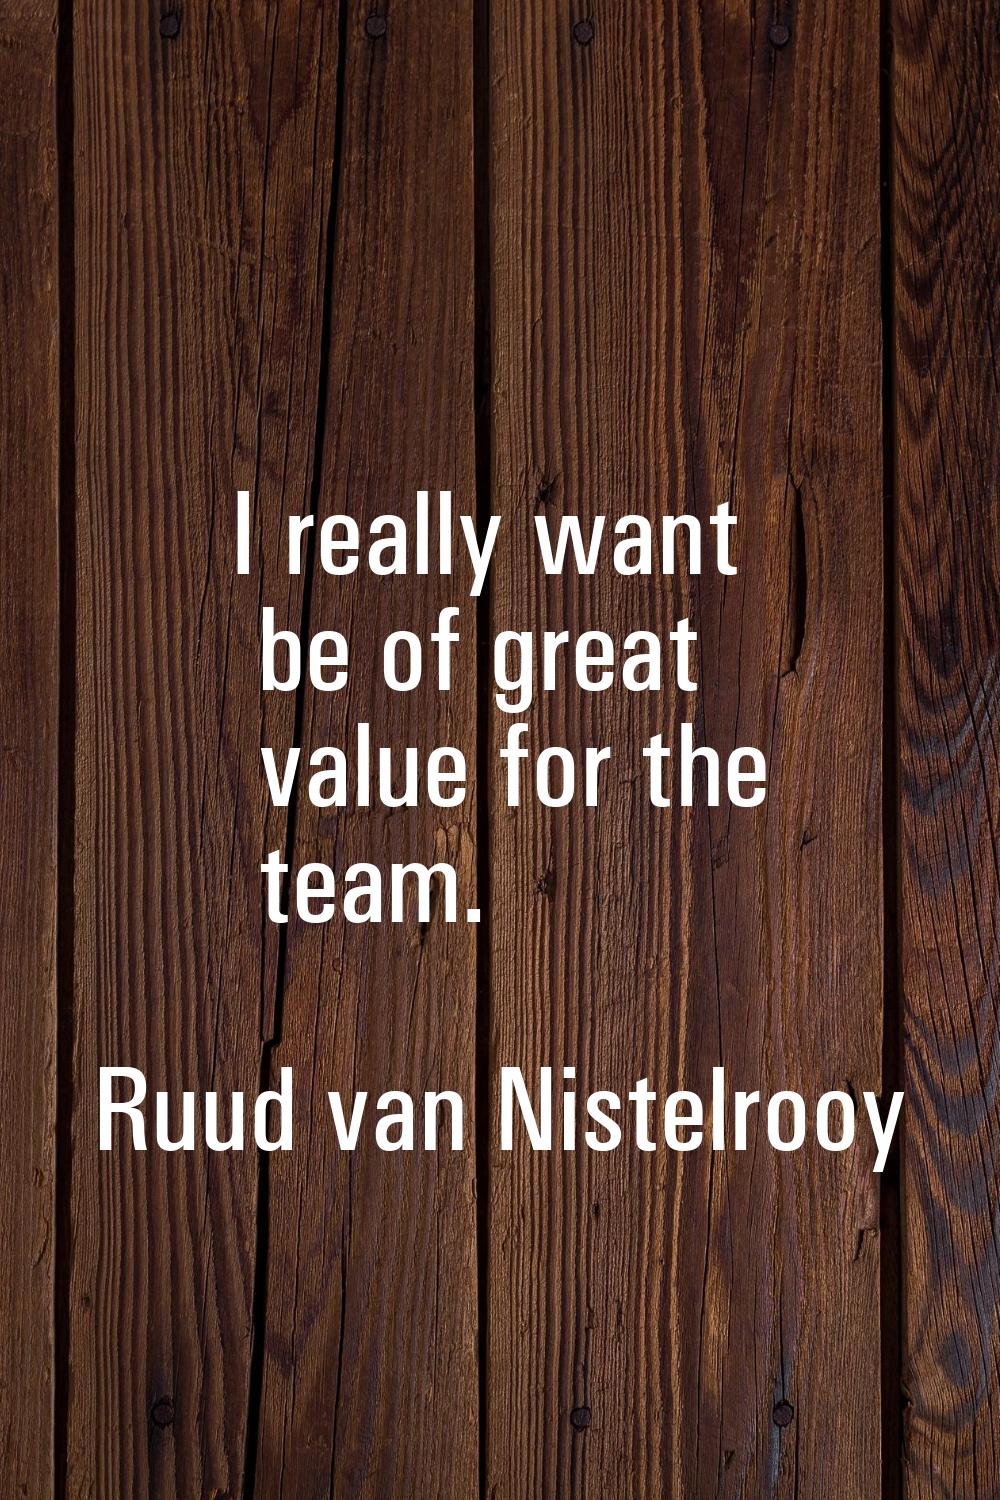 I really want be of great value for the team.